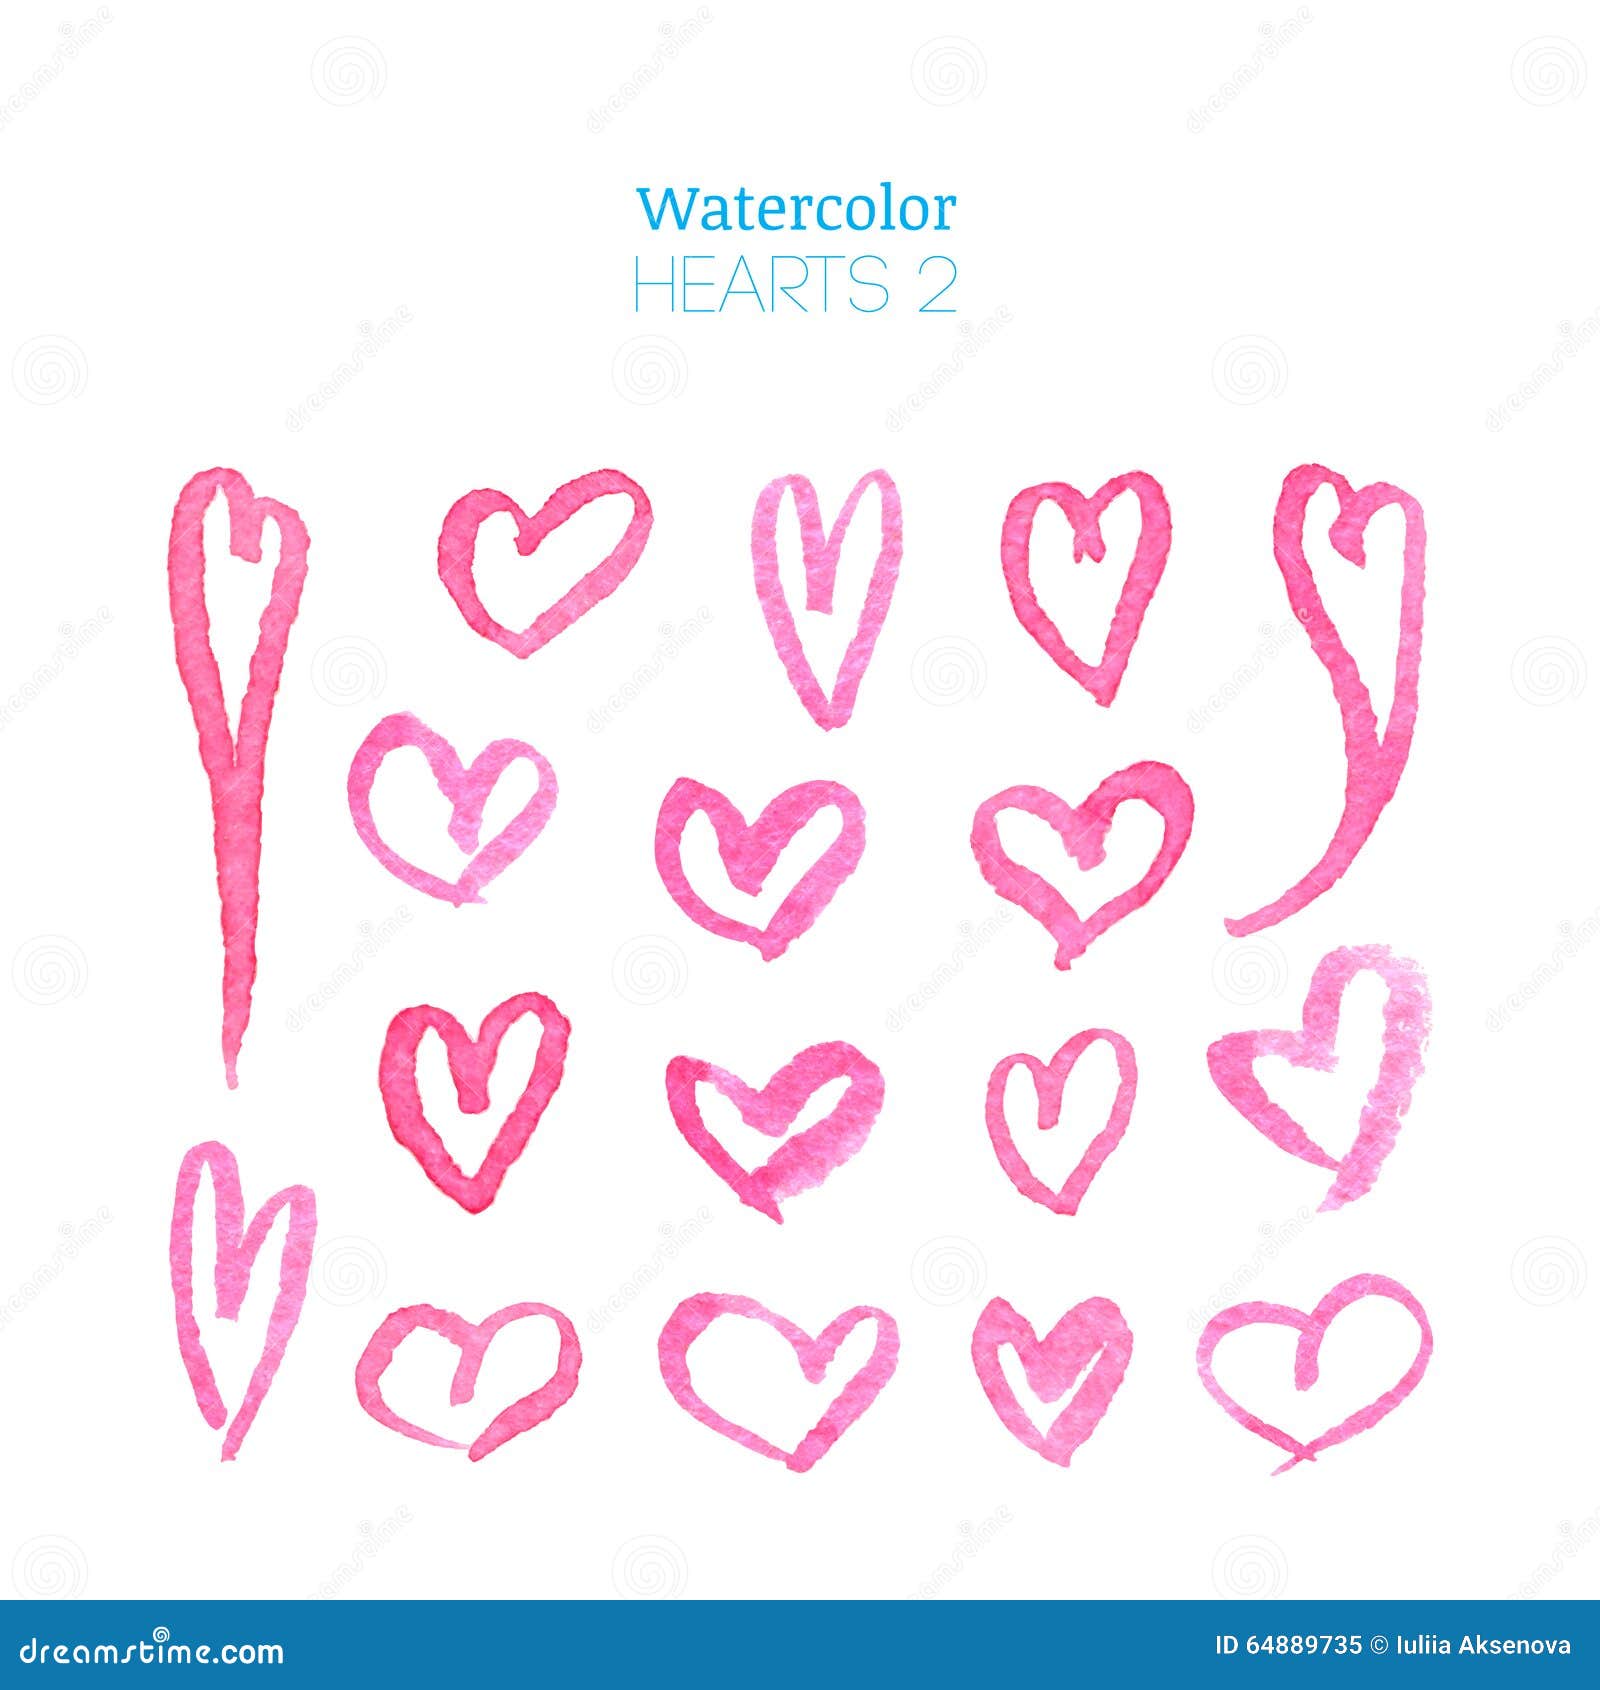 Pink watercolor hearts stock illustration. Illustration of draw - 64889735